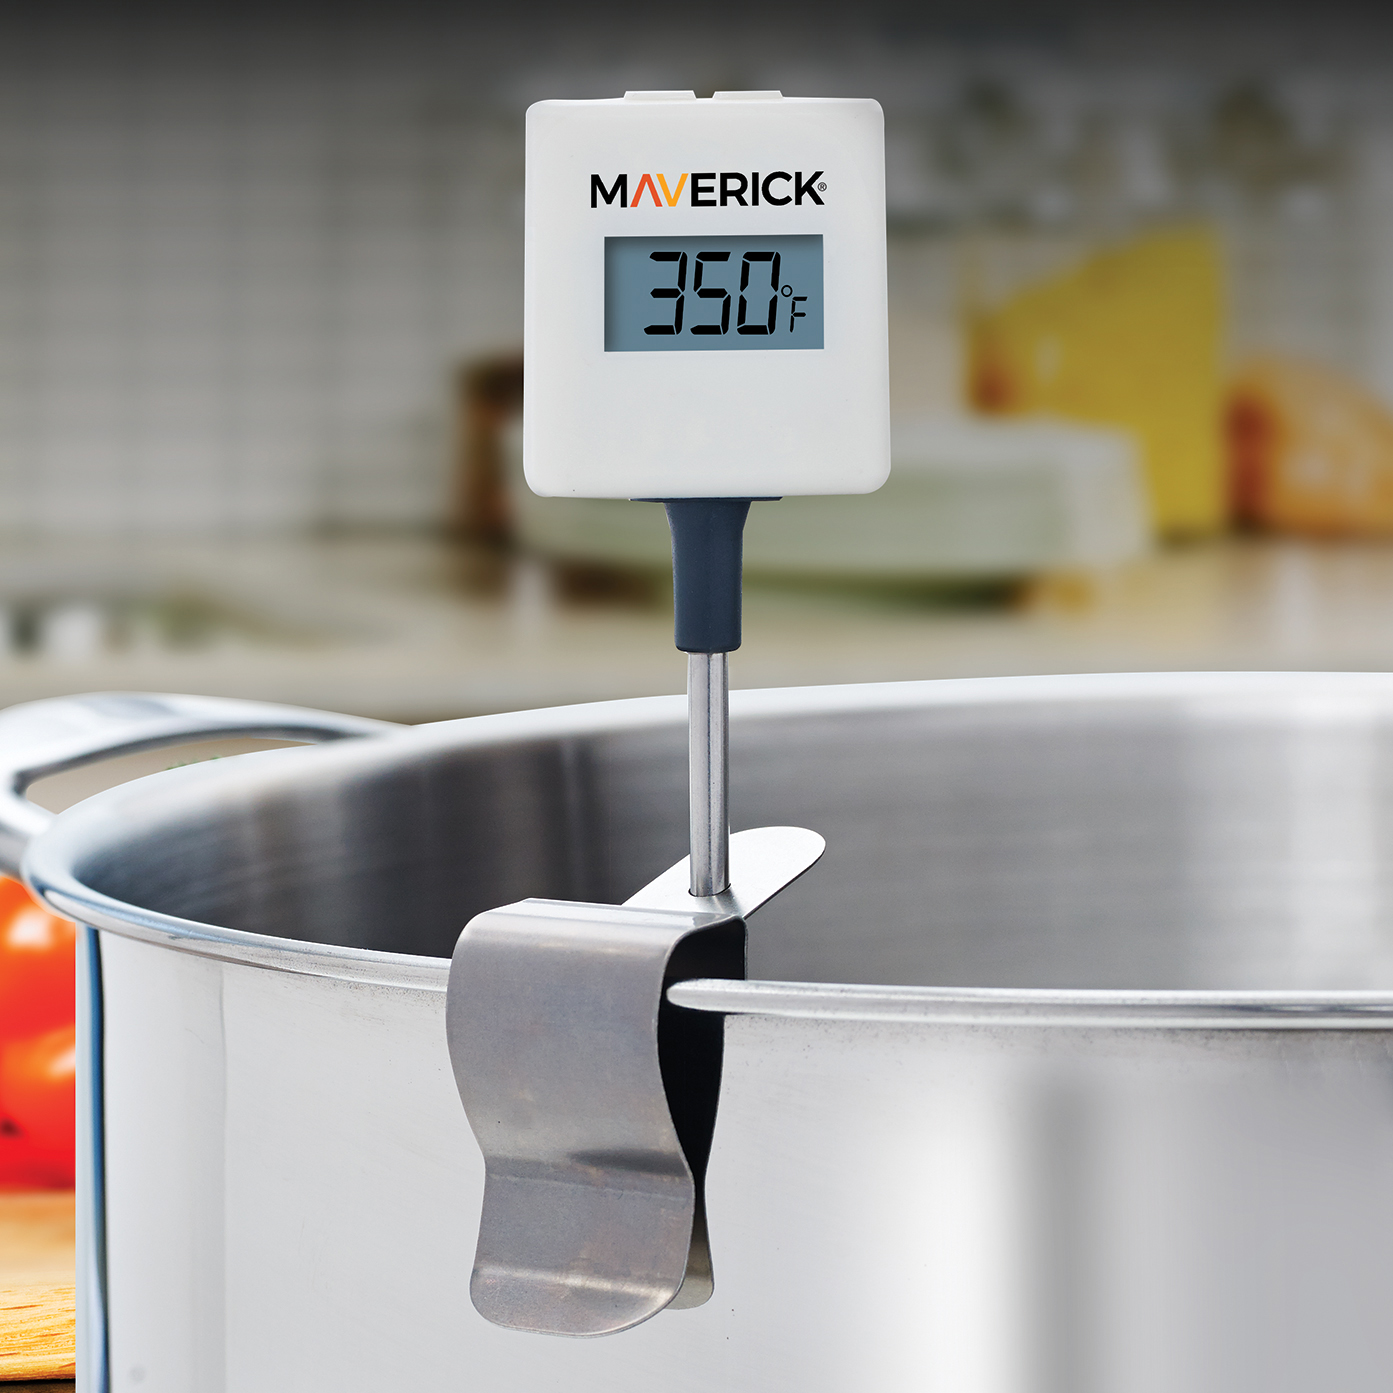 Choice 6 Candy / Deep Fry Probe Thermometer